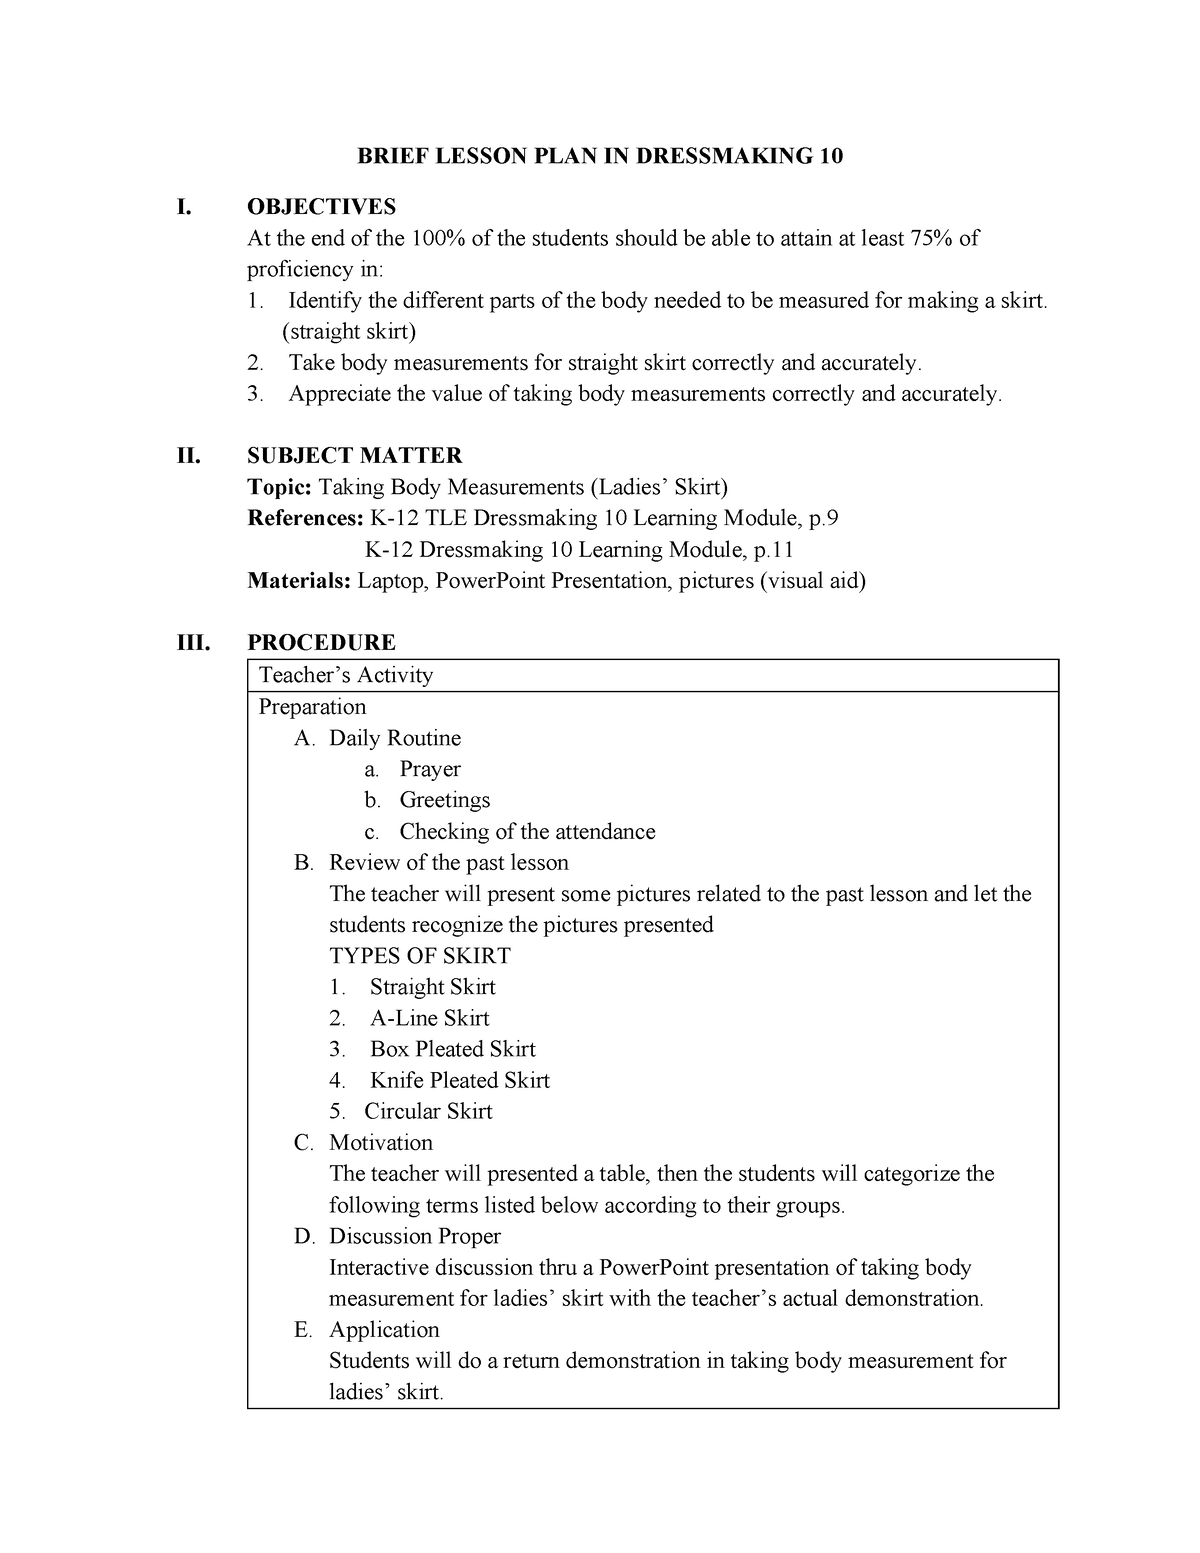 A Detailed Lesson Plan In Dressmaking Docx A Detailed - vrogue.co